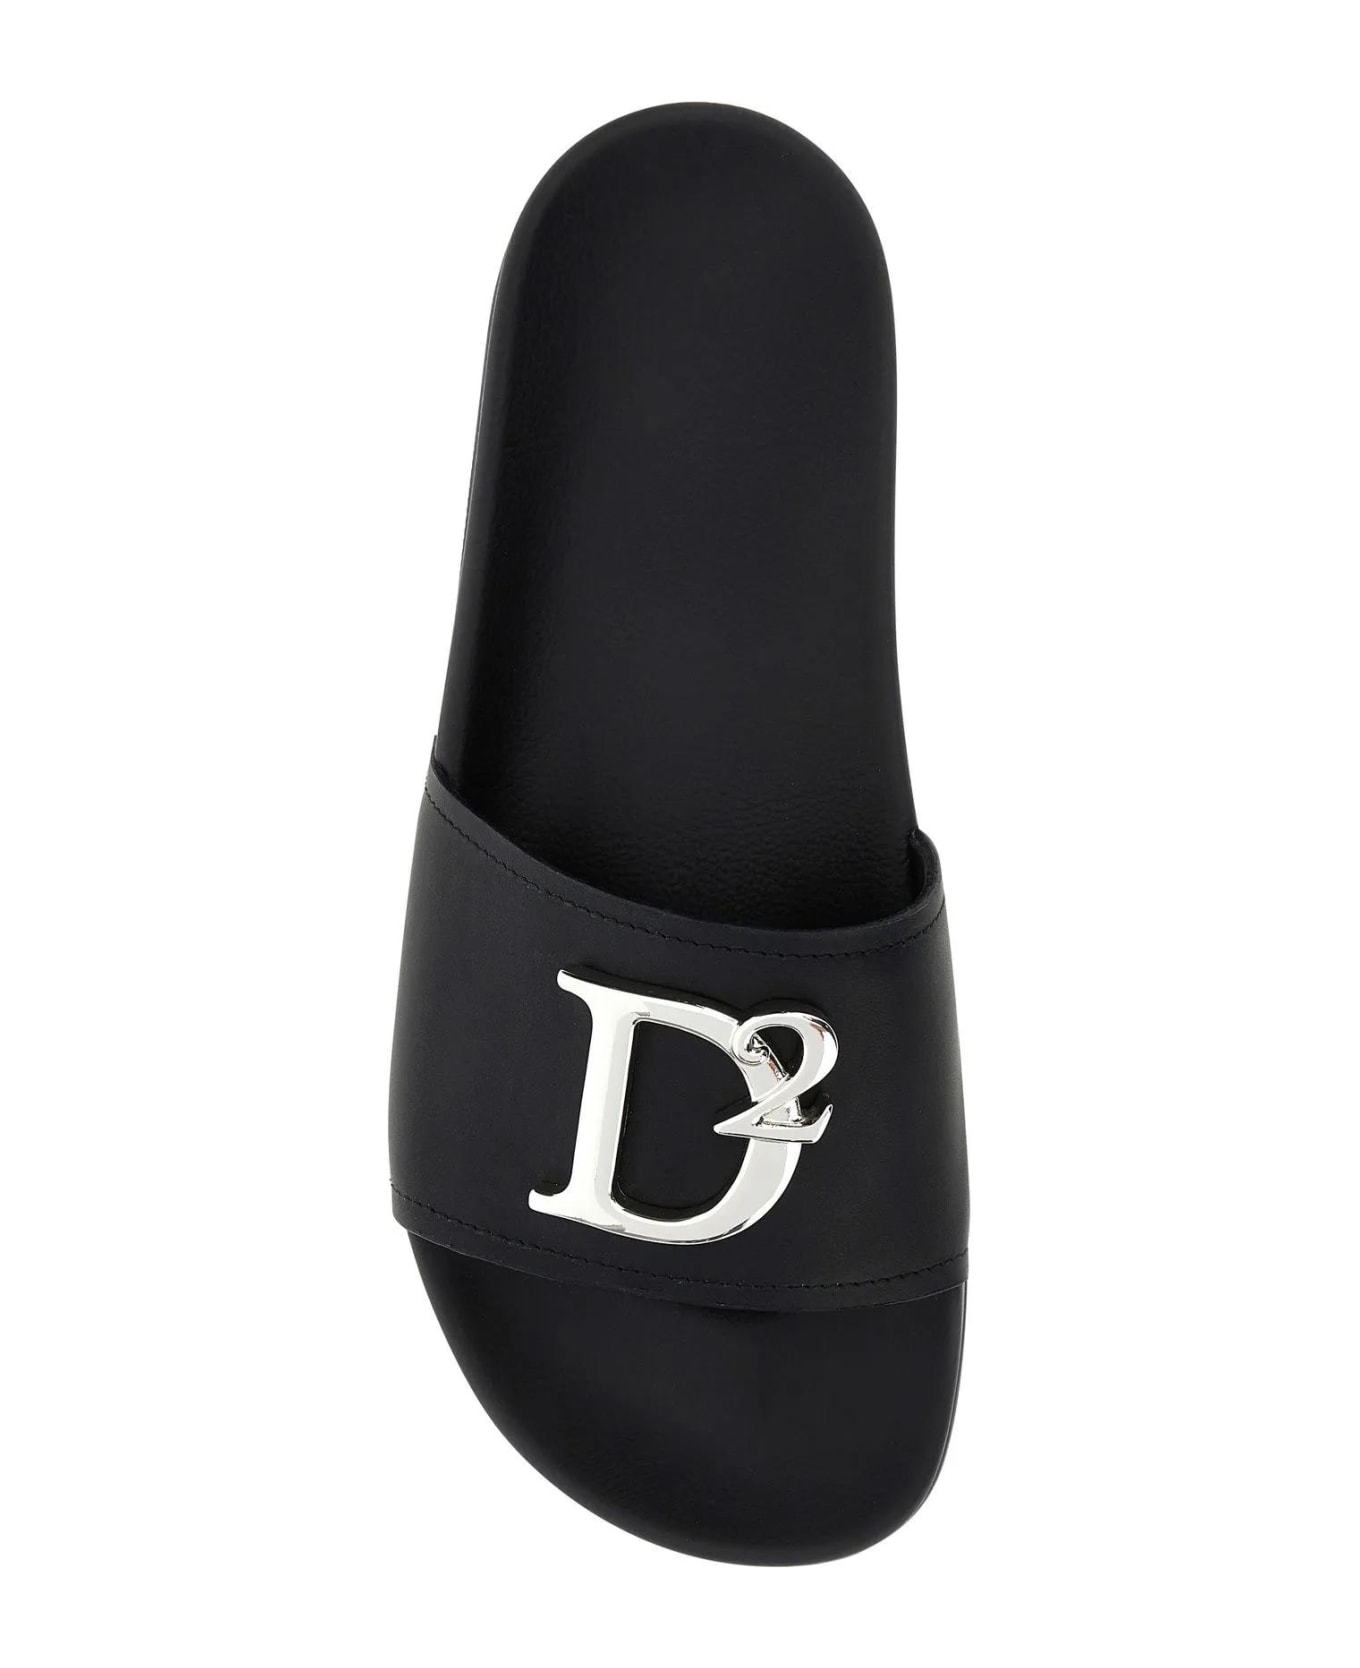 Dsquared2 Black Leather D2 Statement Slippers - Nero サンダル